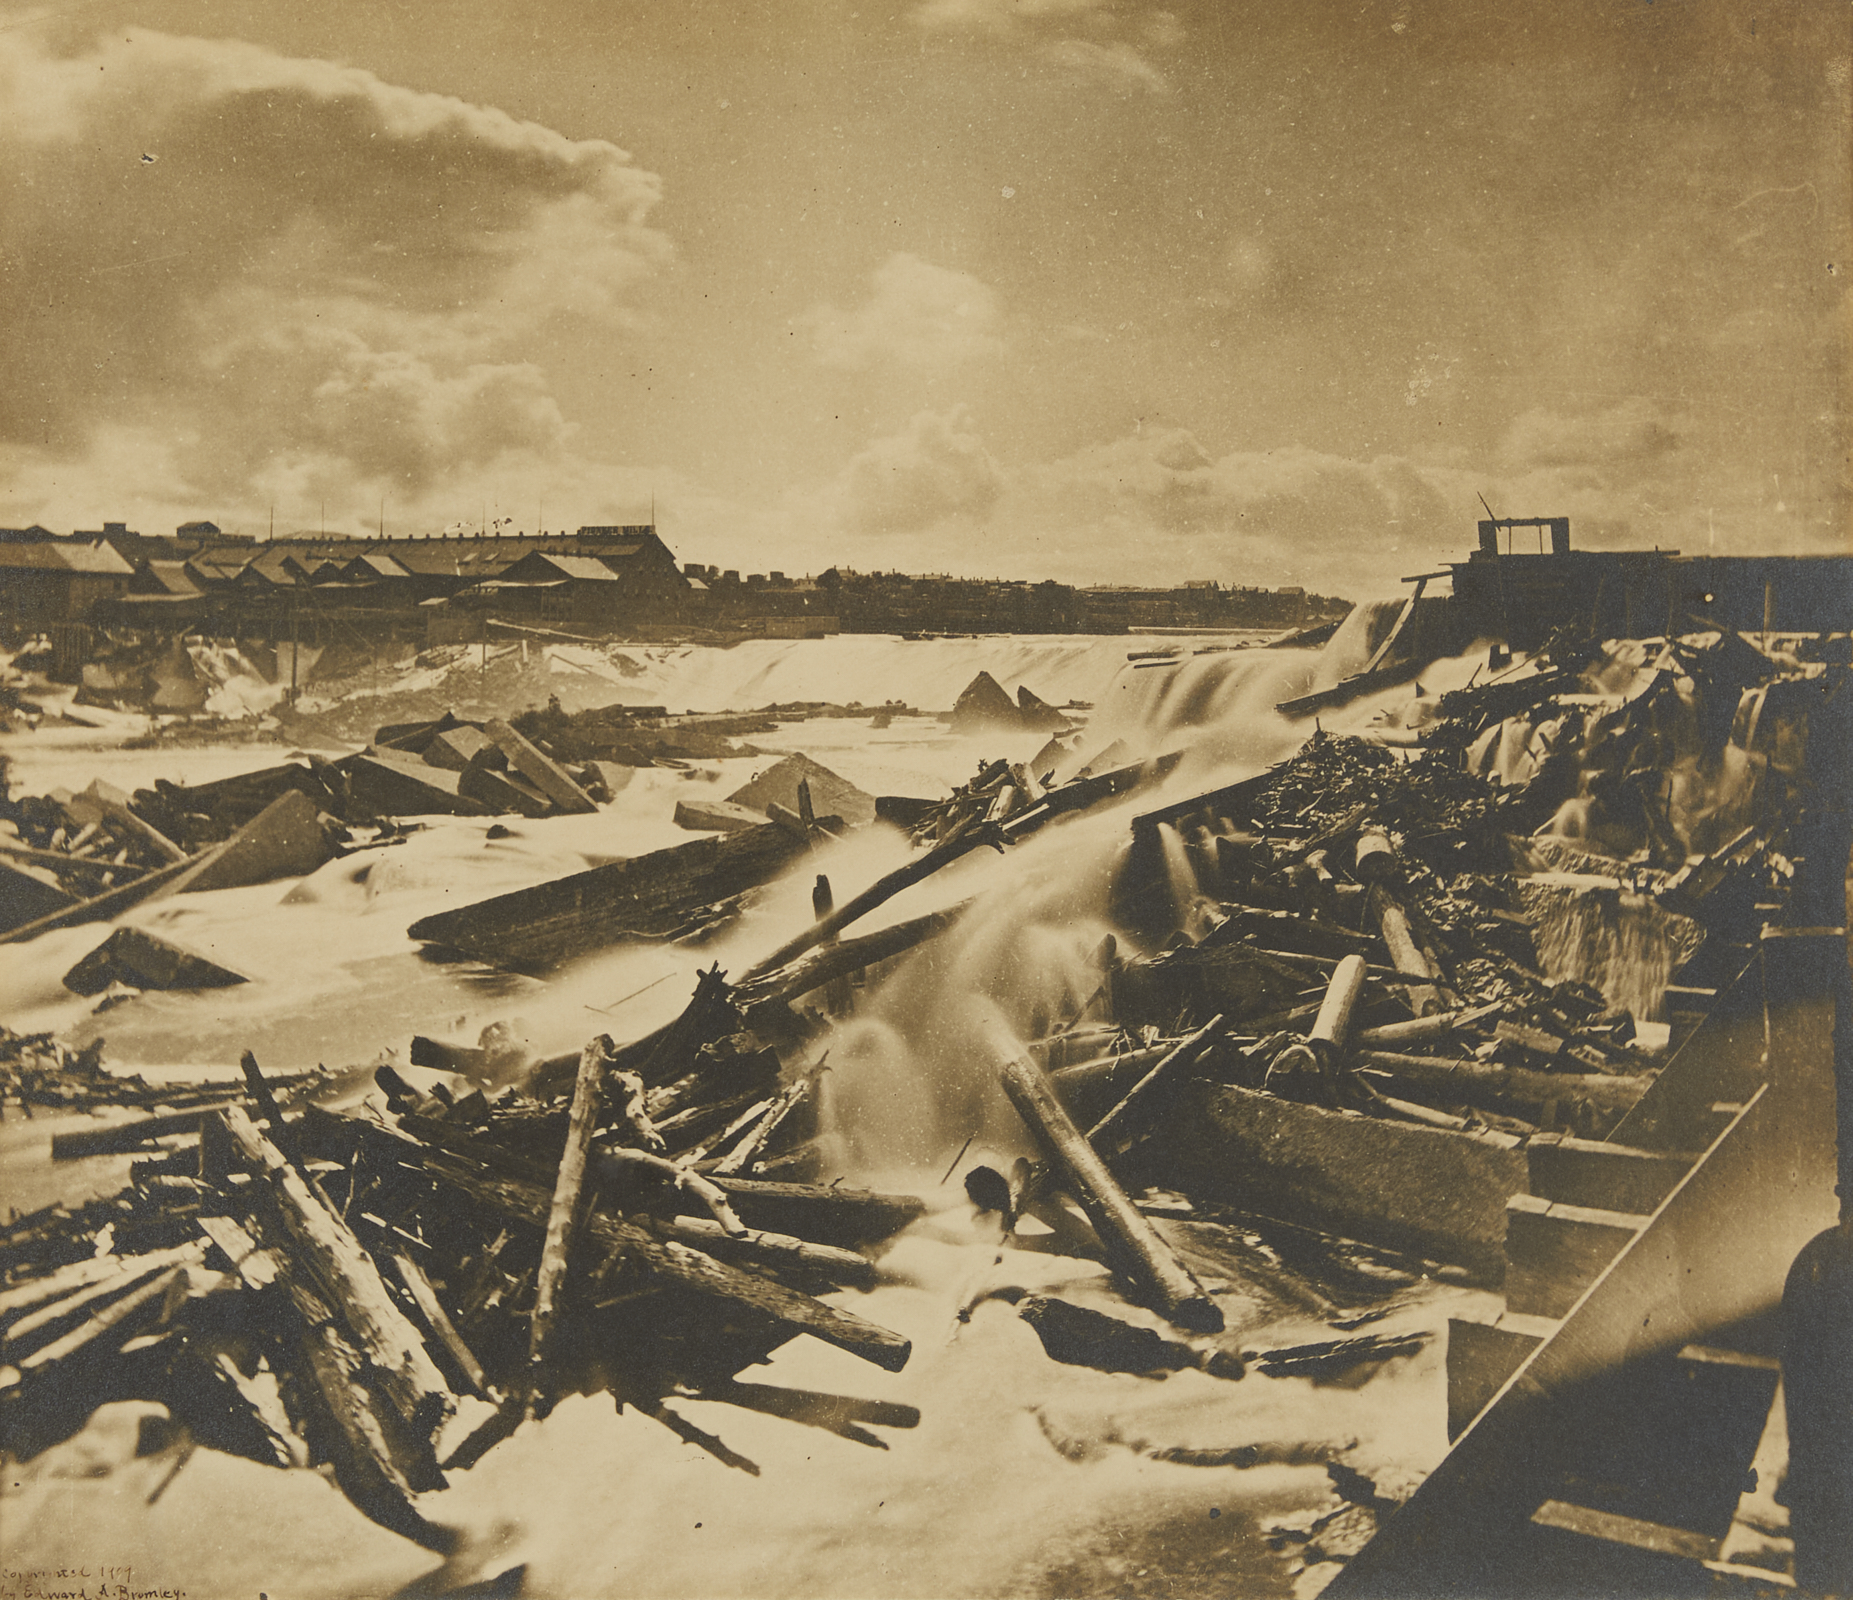 St. Anthony Falls Wreckage Photograph 1909